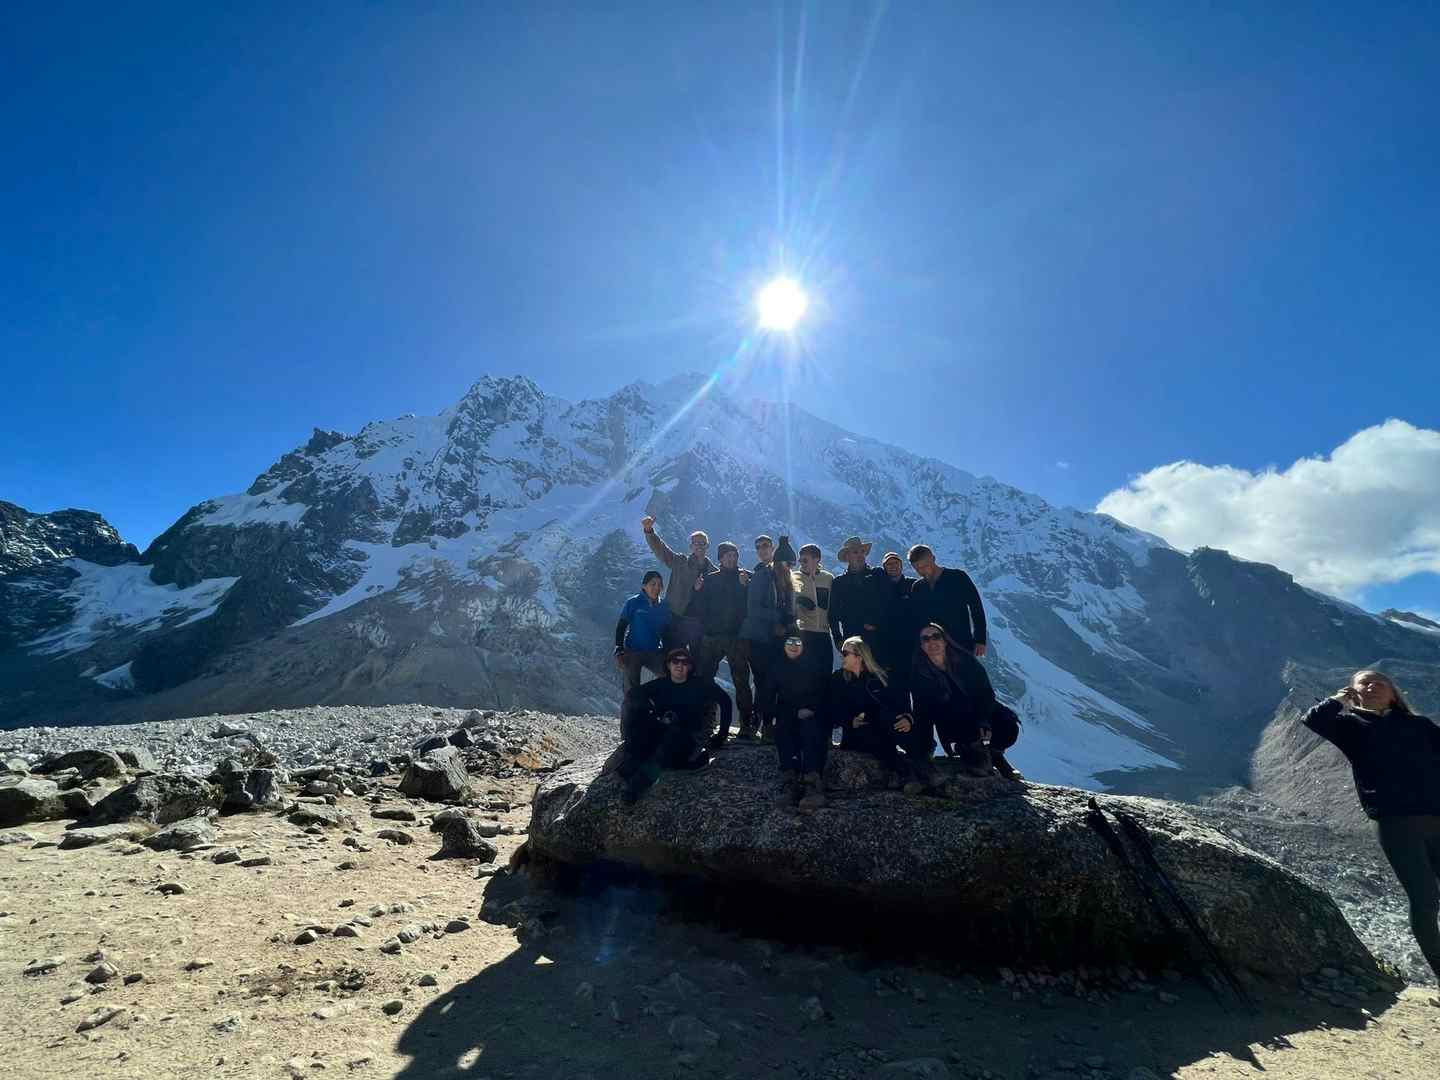 A fantastic trip. The mountains of Peru are...